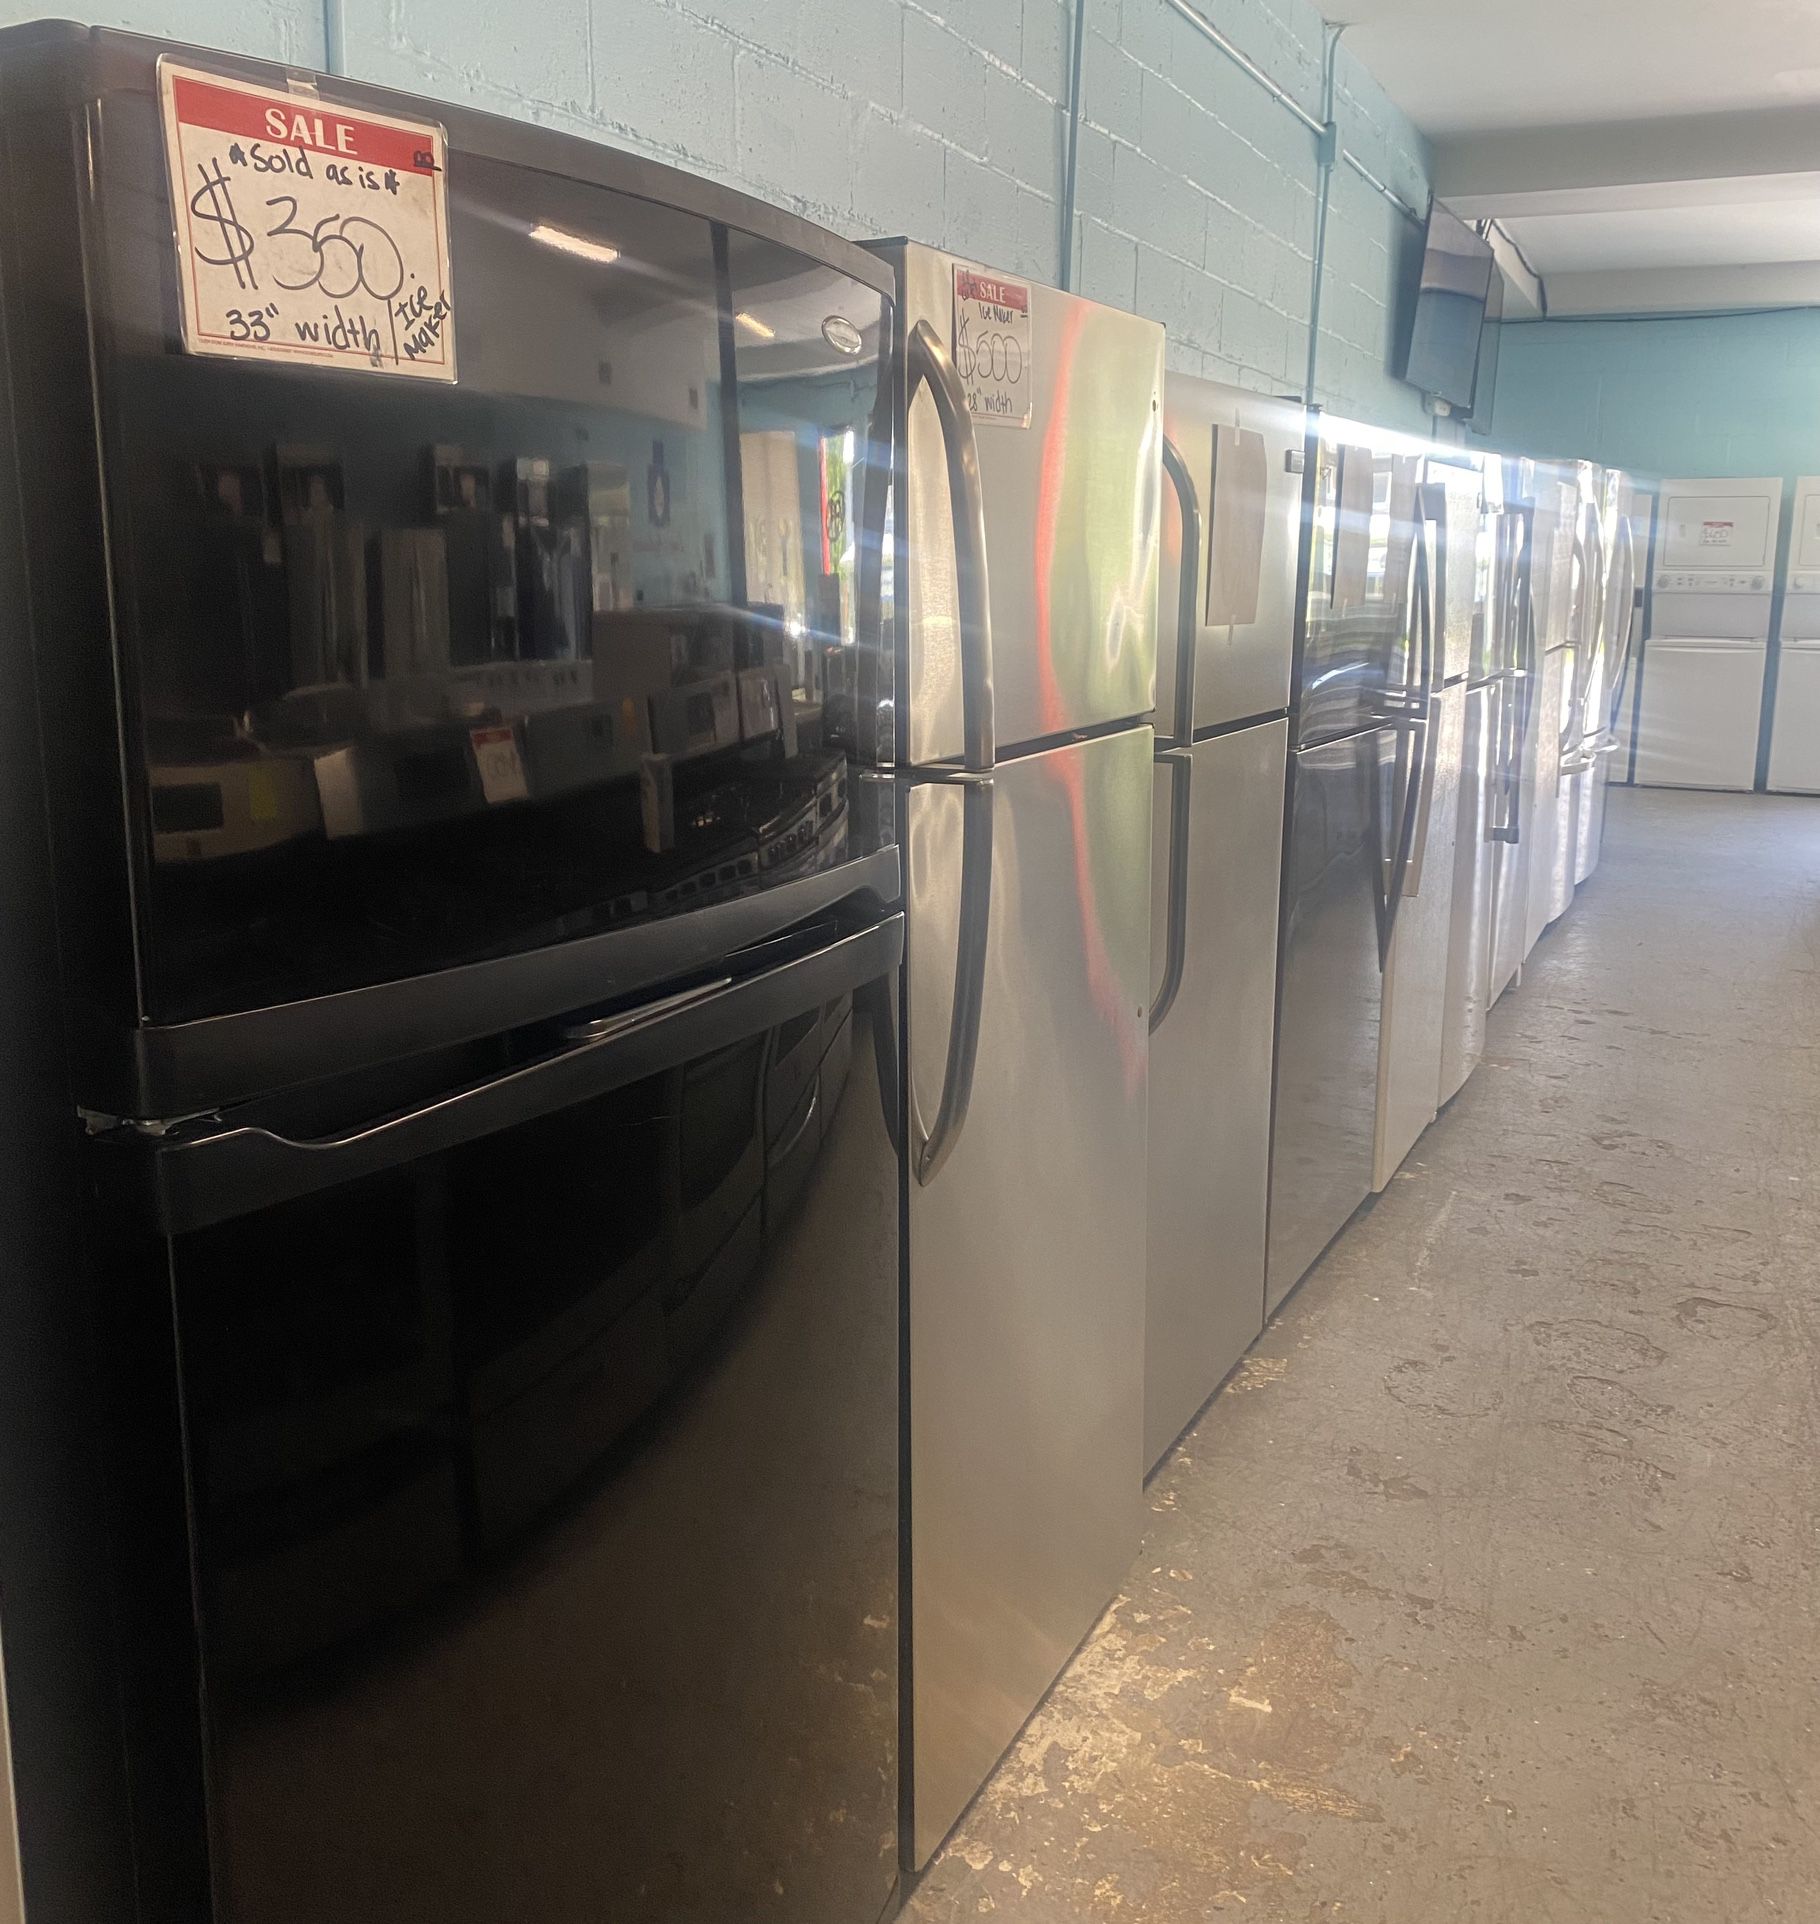 Great Variety On Our Top And Bottom Fridge’s In Excellent Condition 